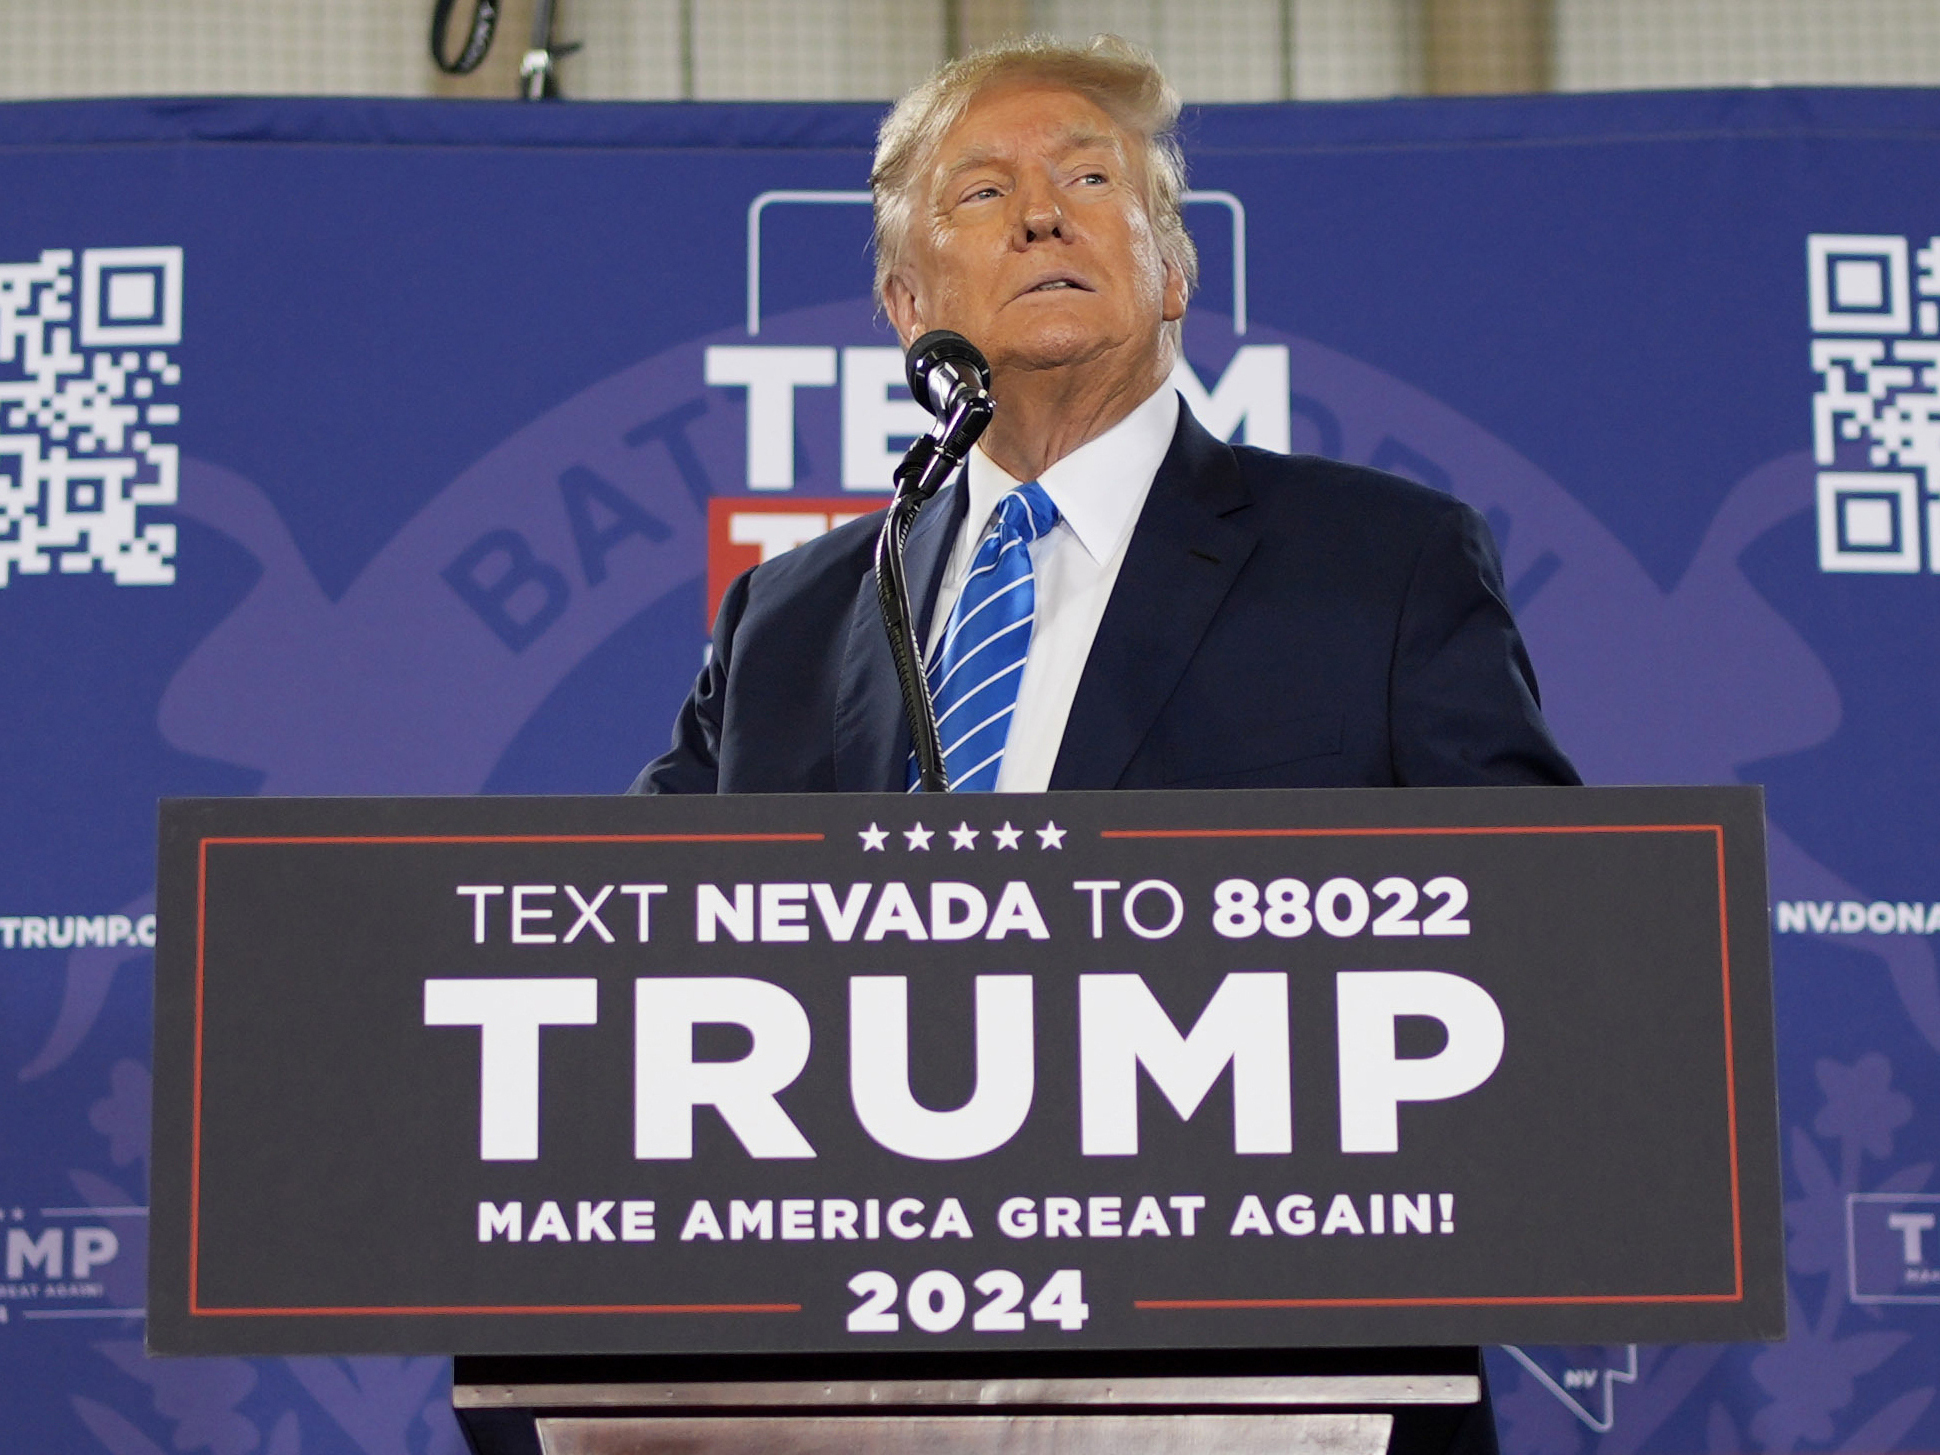 On Caucus Day in Nevada, Trump’s pitch is all about November